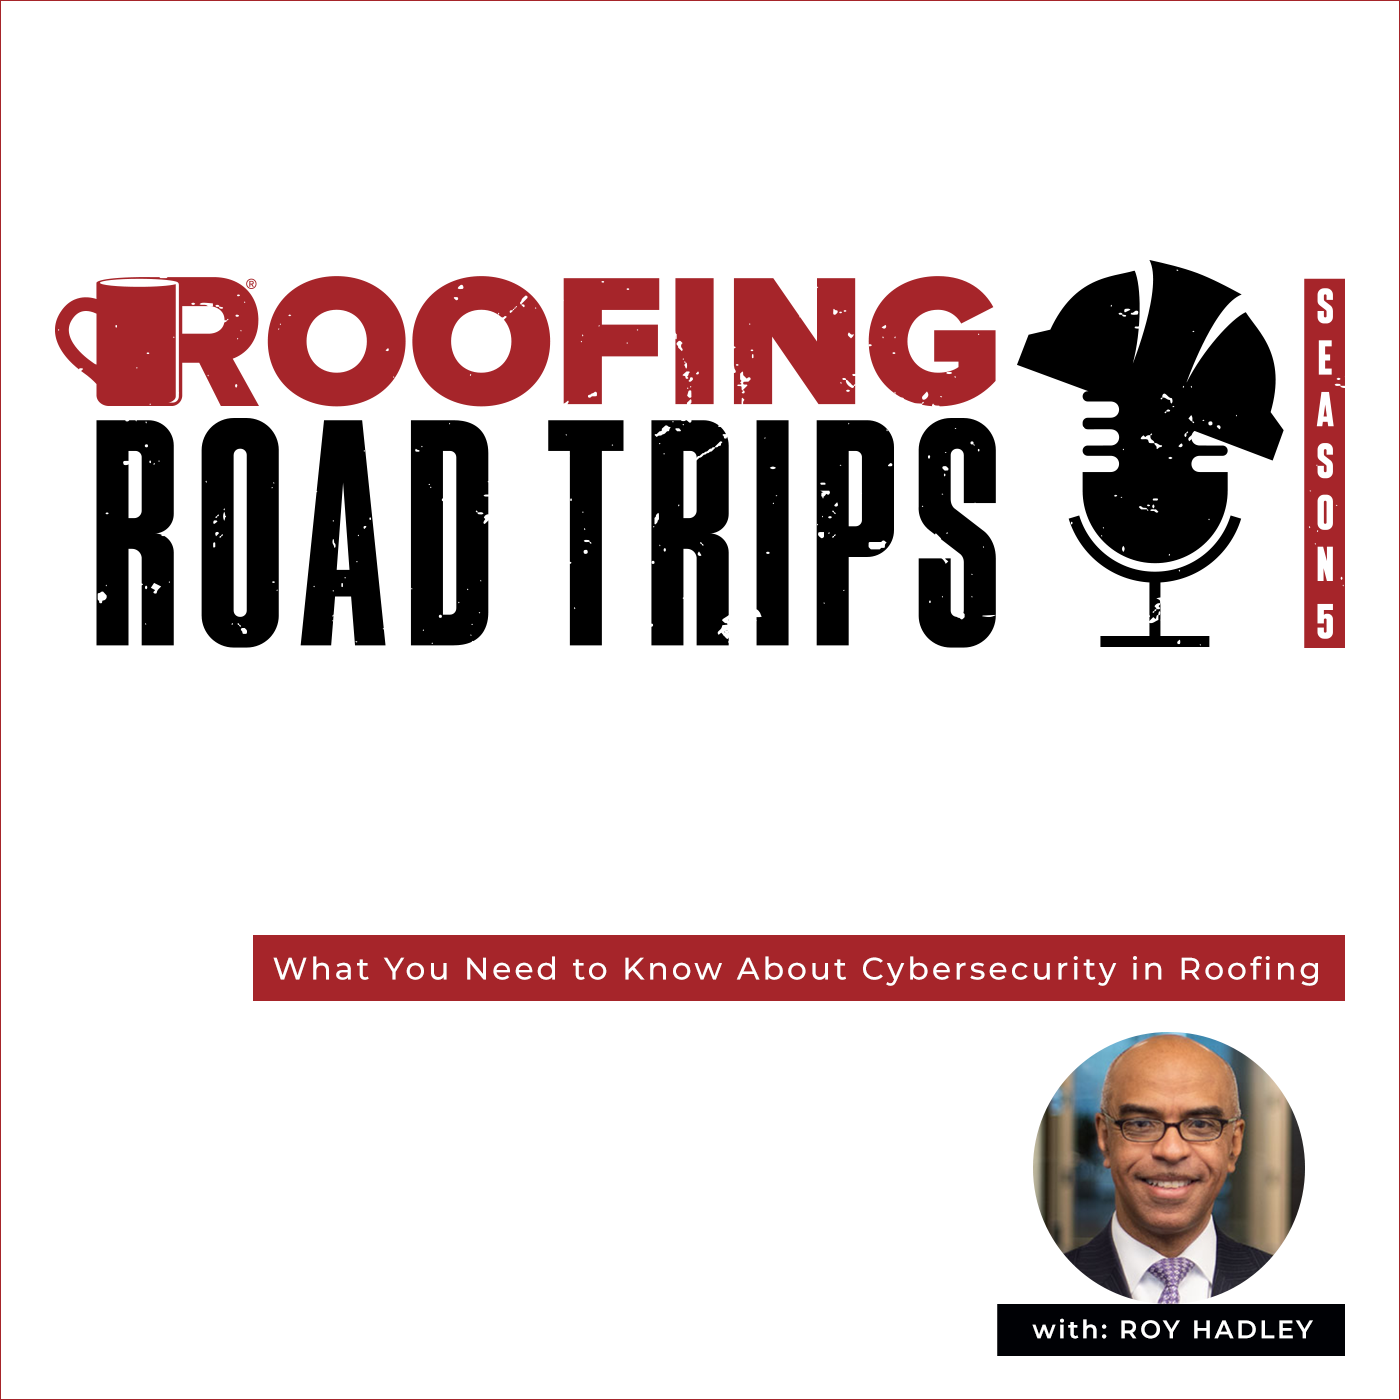 Adams & Reese - Roy Hadley - What You Need to Know About Cybersecurity in Roofing